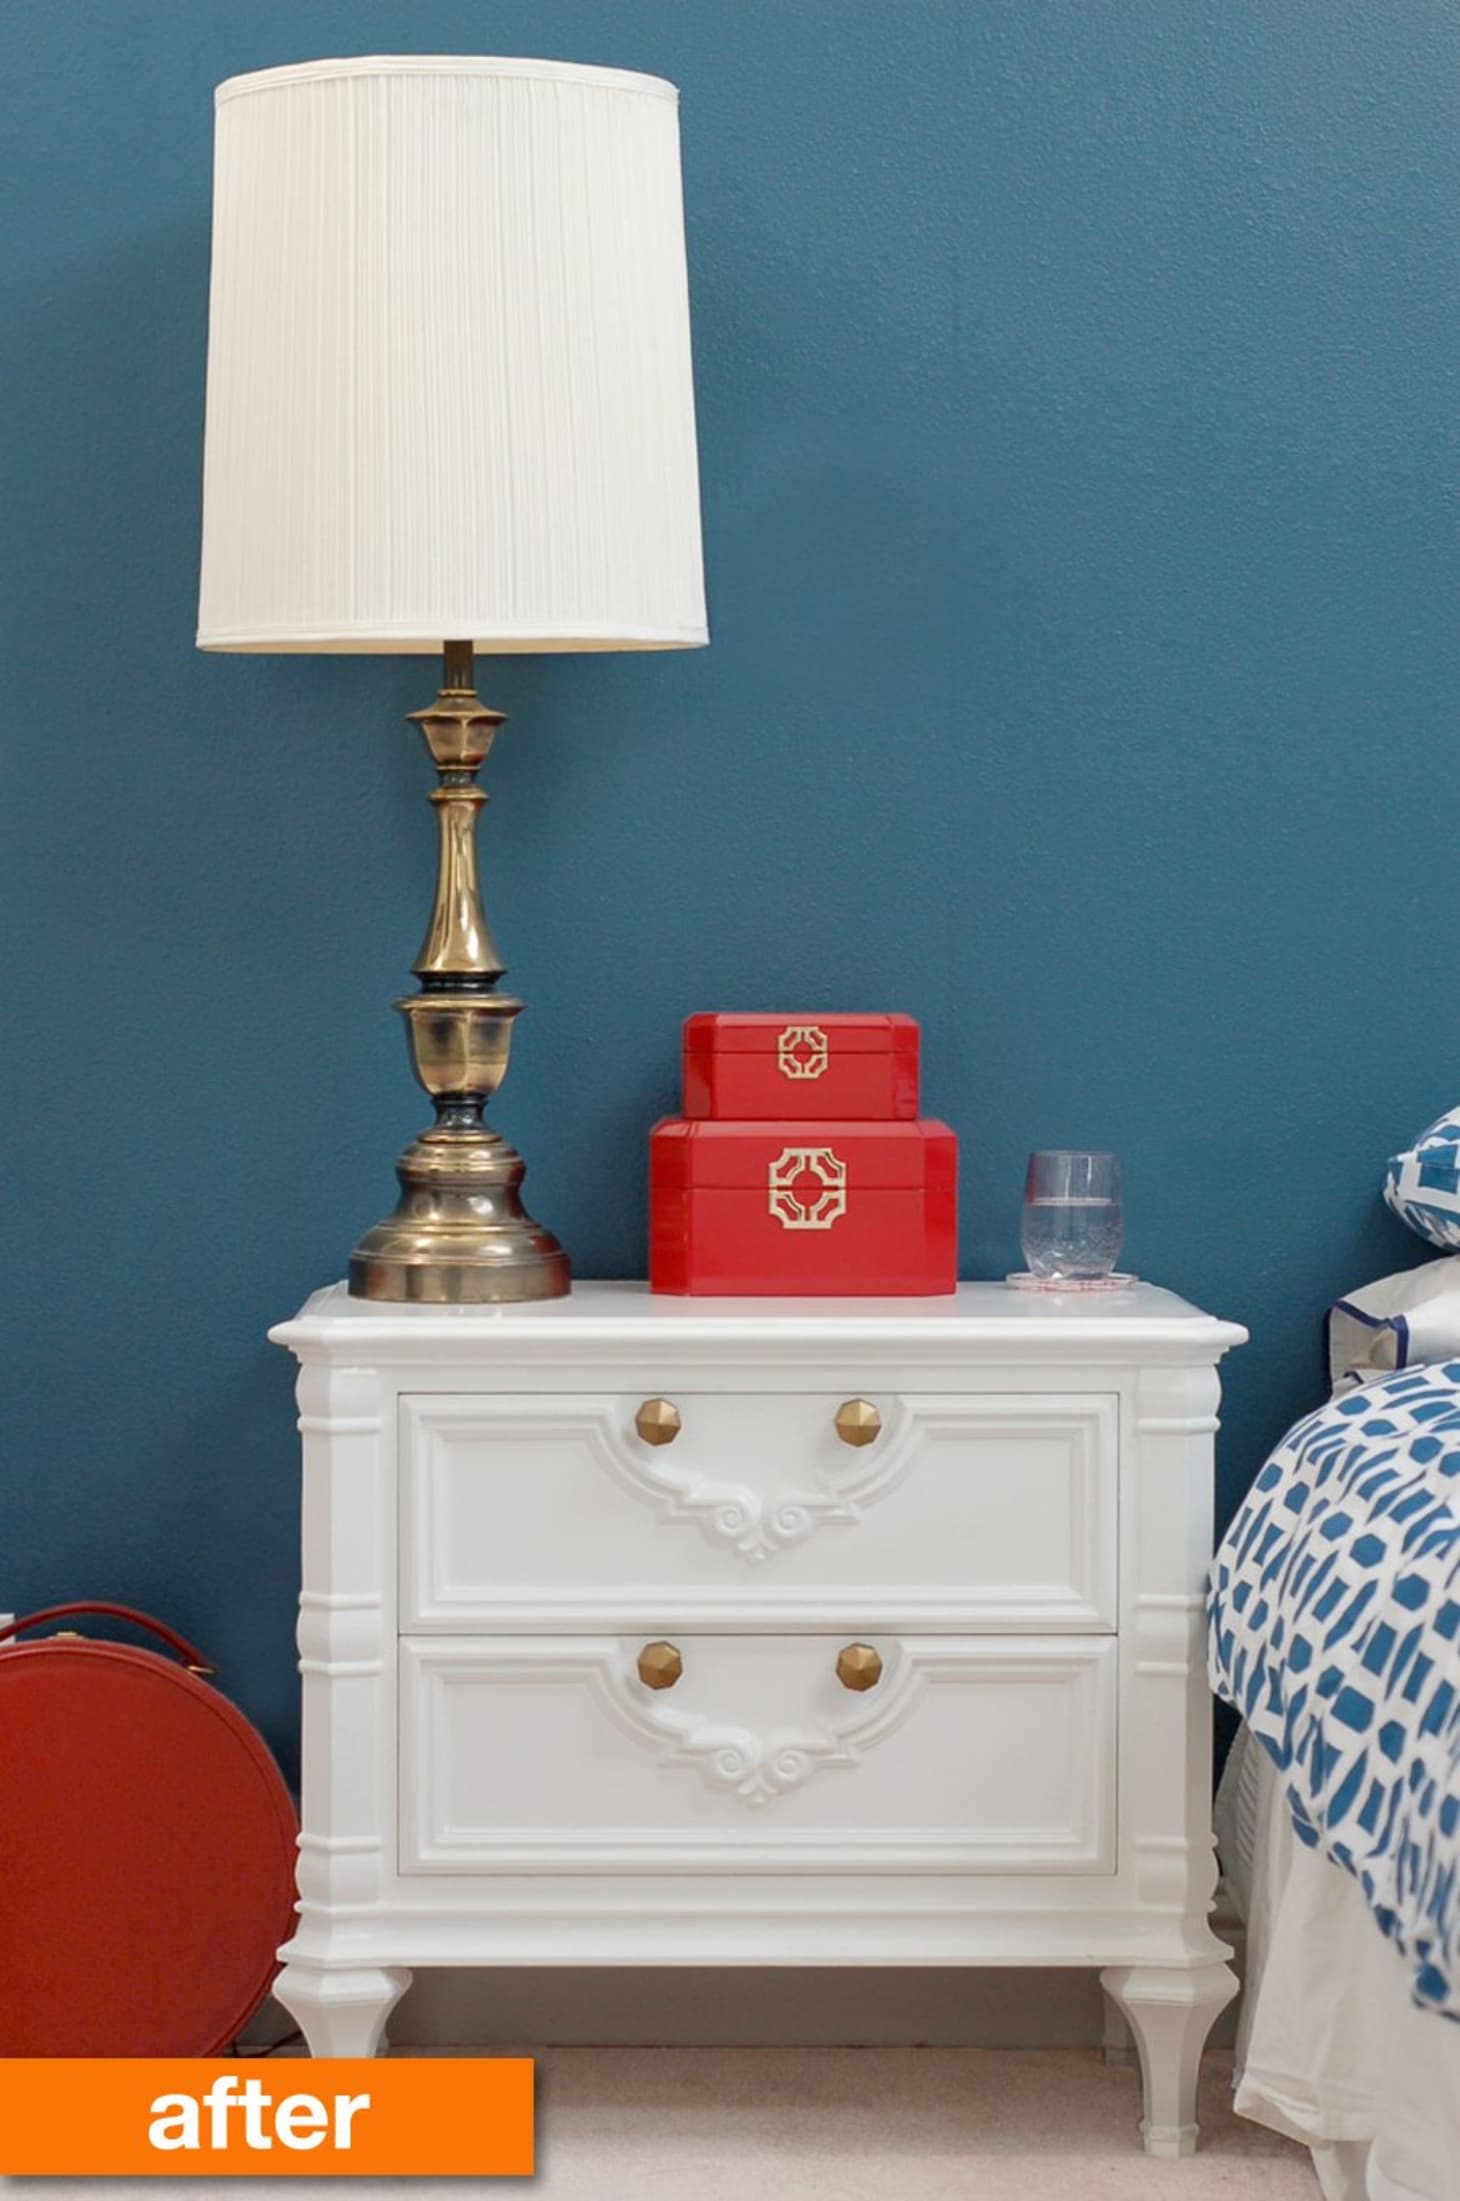 Makeover Your Nightstands with These DIY Ideas | Apartment Therapy